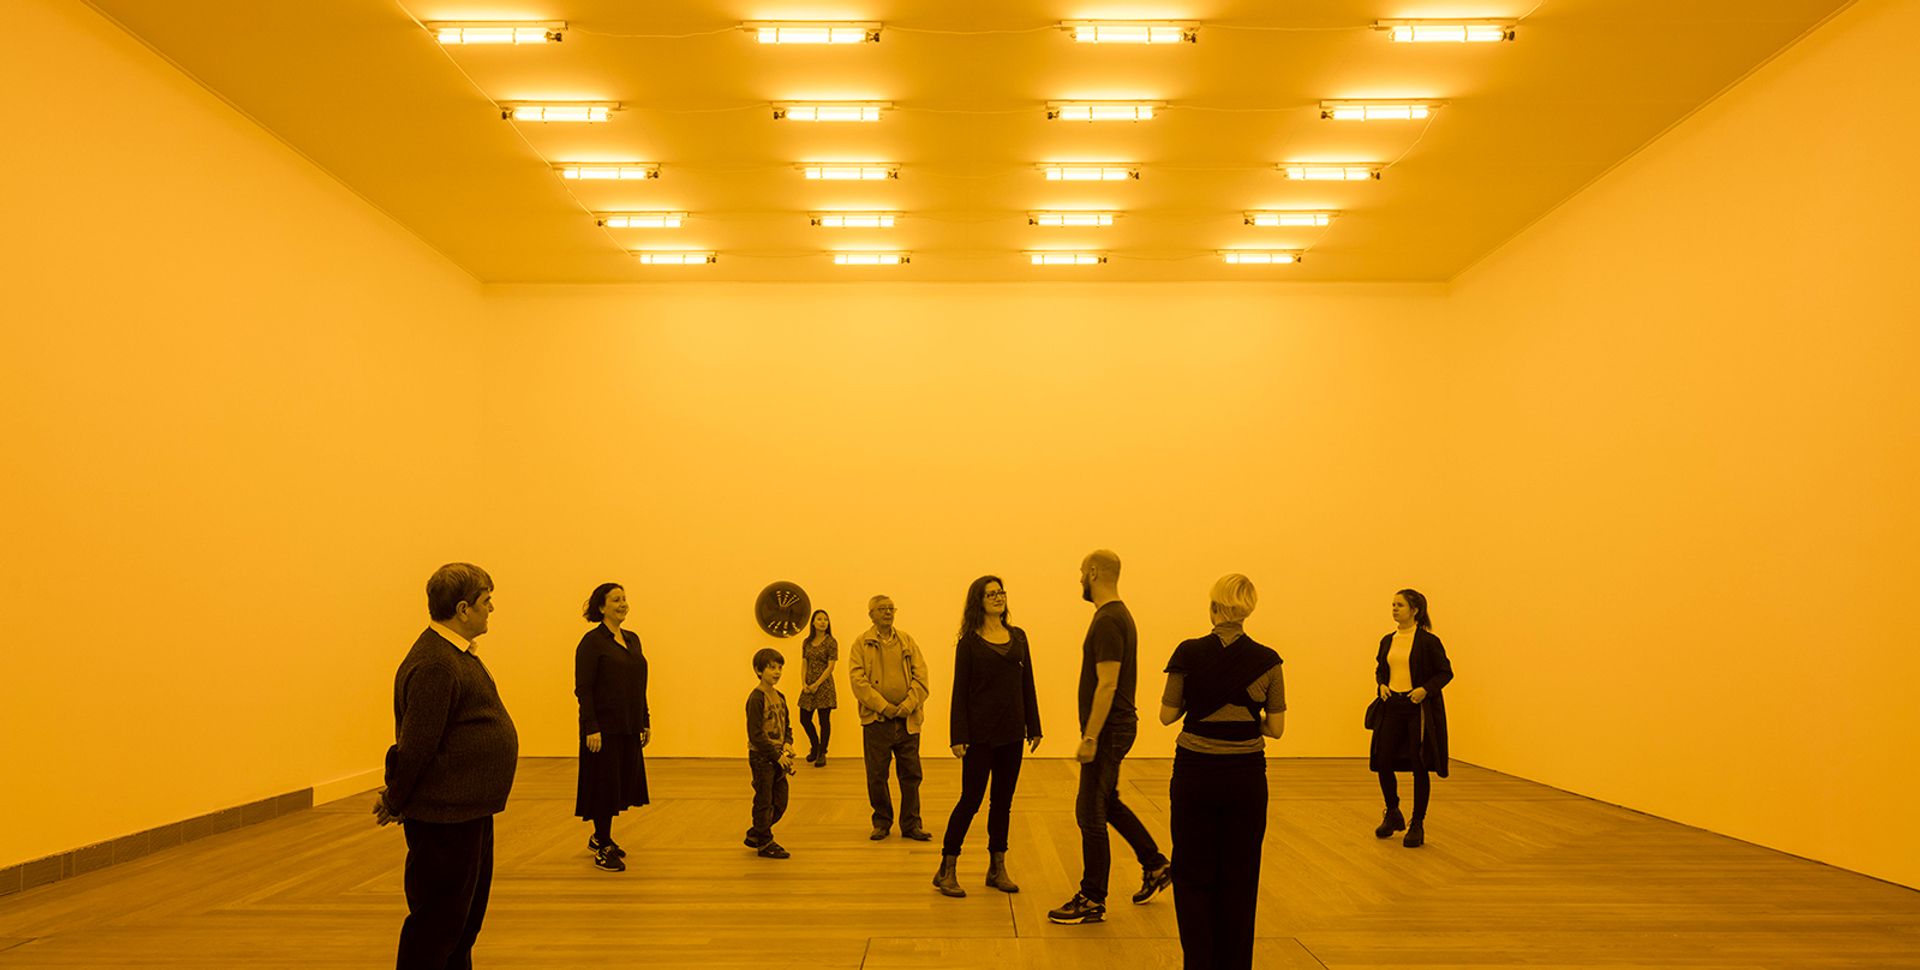 Olafur Eliasson's Room for one colour (1997). Installation view at Moderna Museet, Stockholm, in 2015 Olafur Eliasson. Photo: Anders Sune Berg